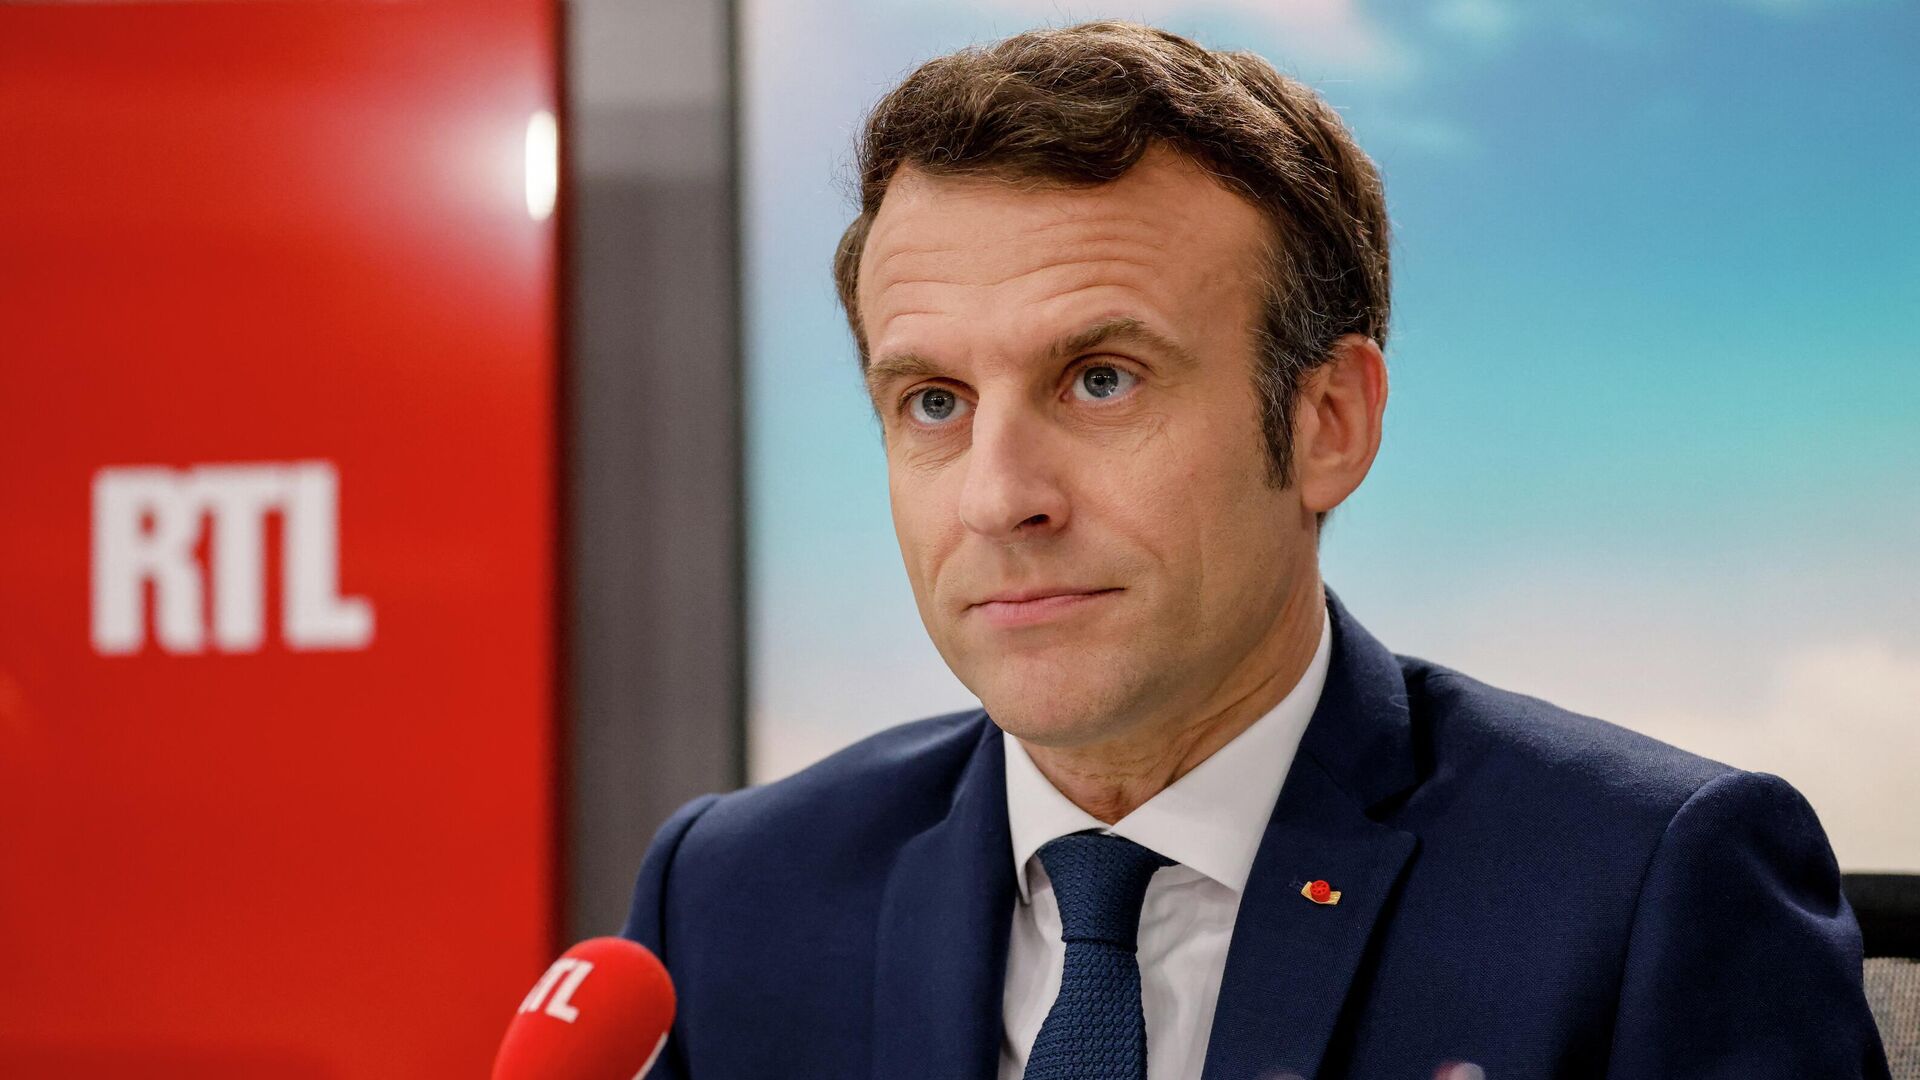 French President and liberal party La Republique en Marche (LREM) candidate for re-election Emmanuel Macron poses before a live interview on the set of French private radio station RTL in Neuilly-sur-Seine on April 8, 2022, as part of his political campaign two days before the first round of the French presidential election. - Sputnik International, 1920, 22.06.2022